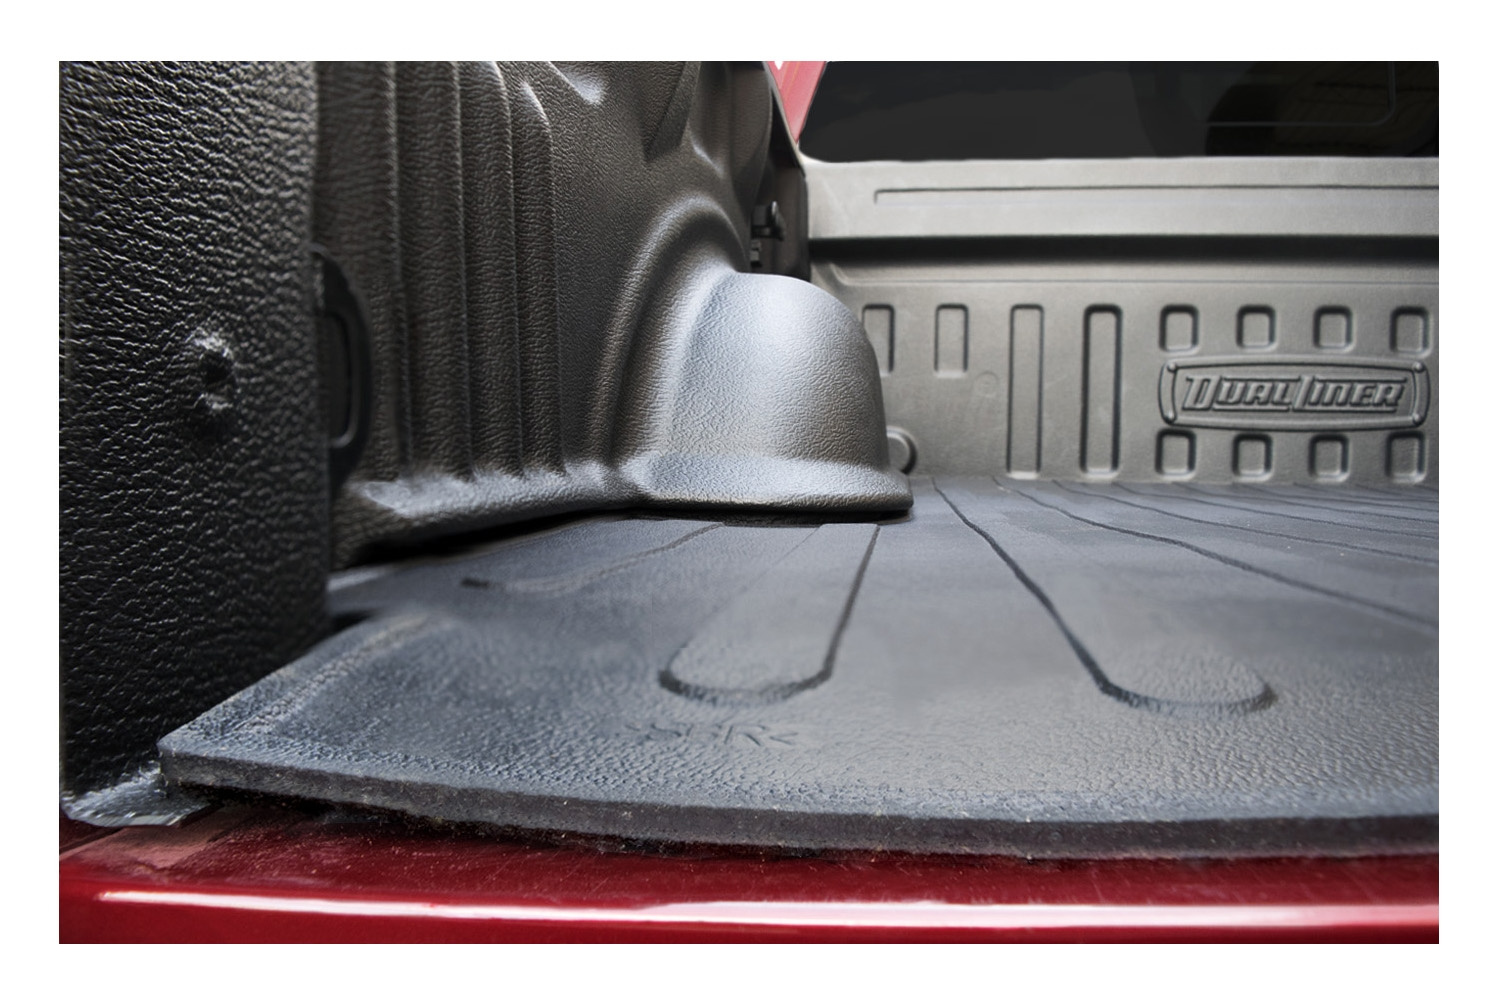 2021 2022 F150 Truck Bed Liner Bedliner For Ford F 150 With 5 Ft 6